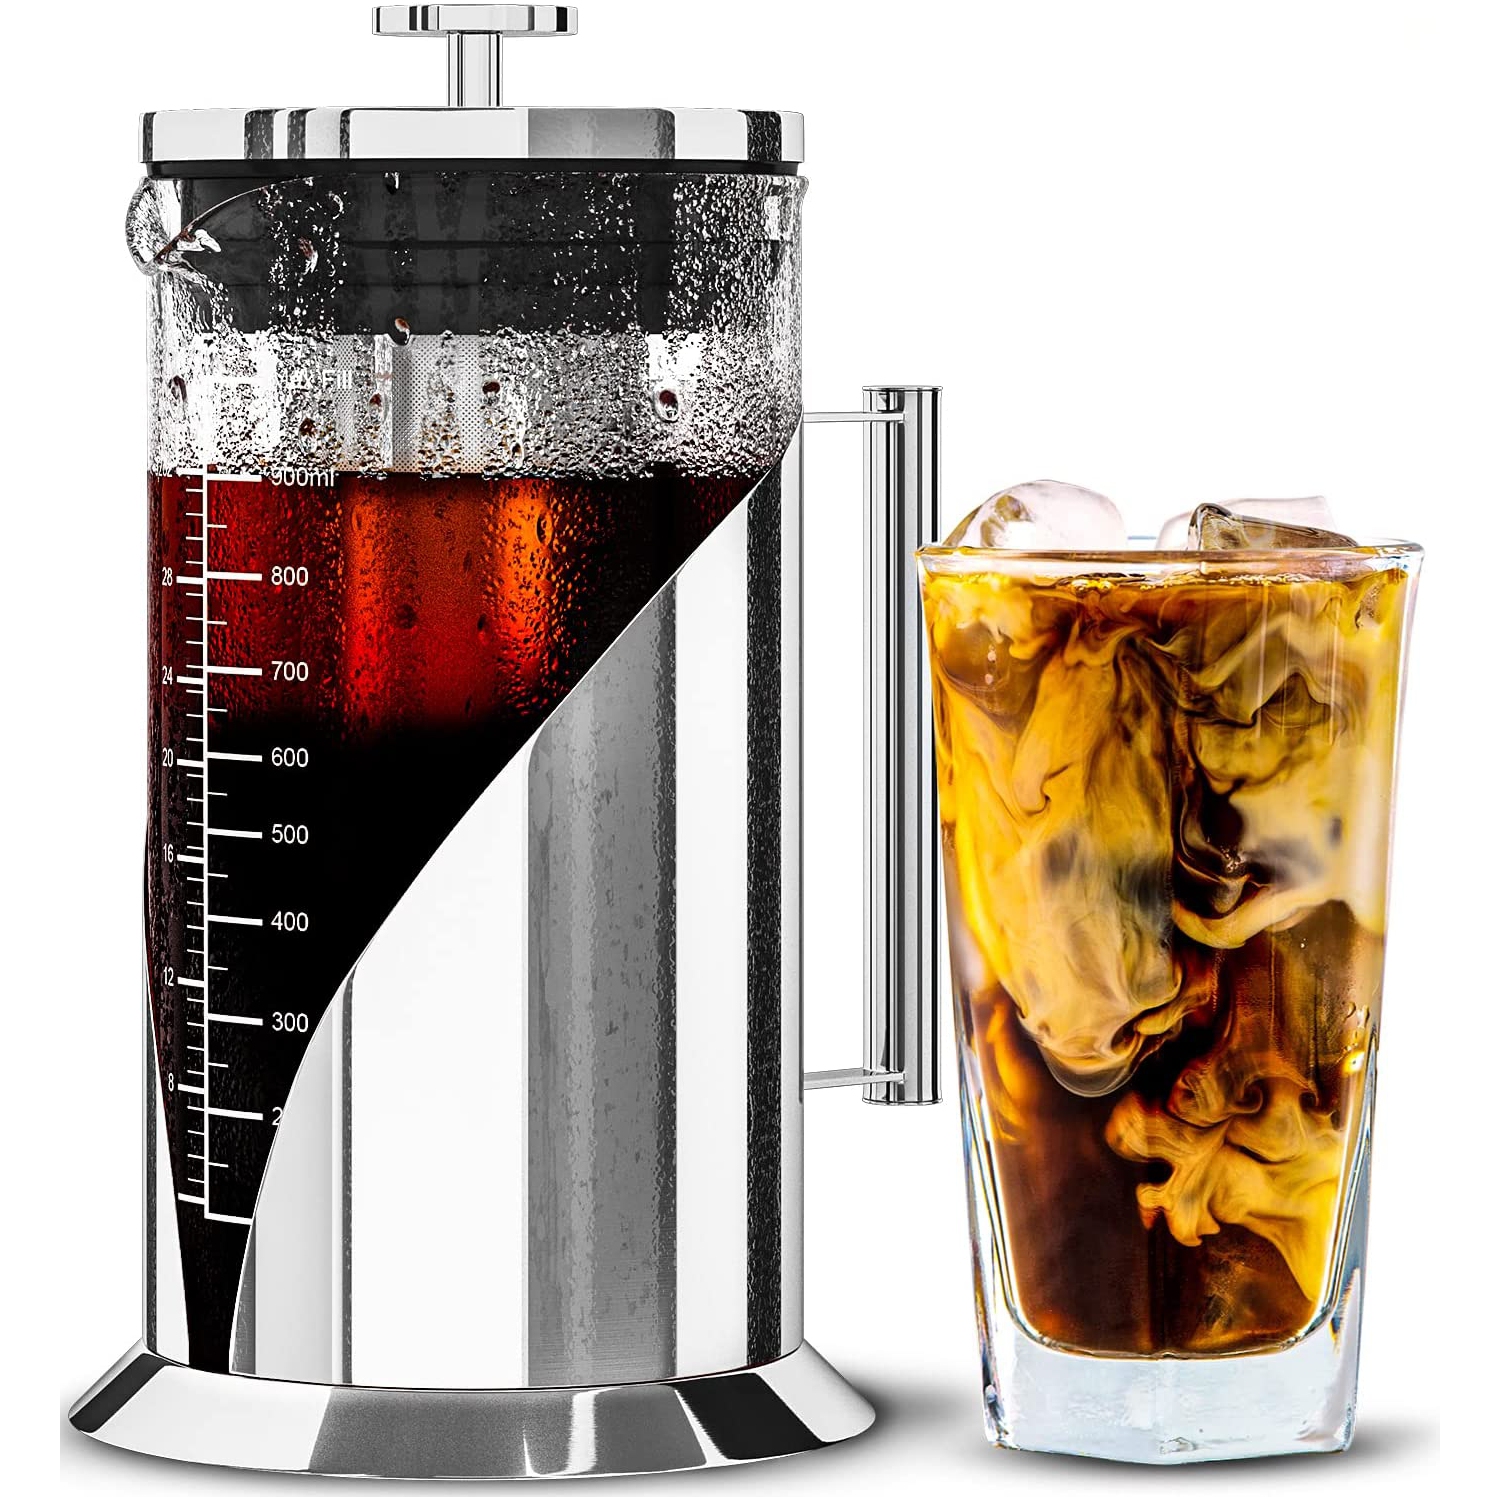 Cold Brew Coffee Maker - 34 Ounces - Air Tight Seal with Faster Steep Time - Ice Tea and Coffee Server